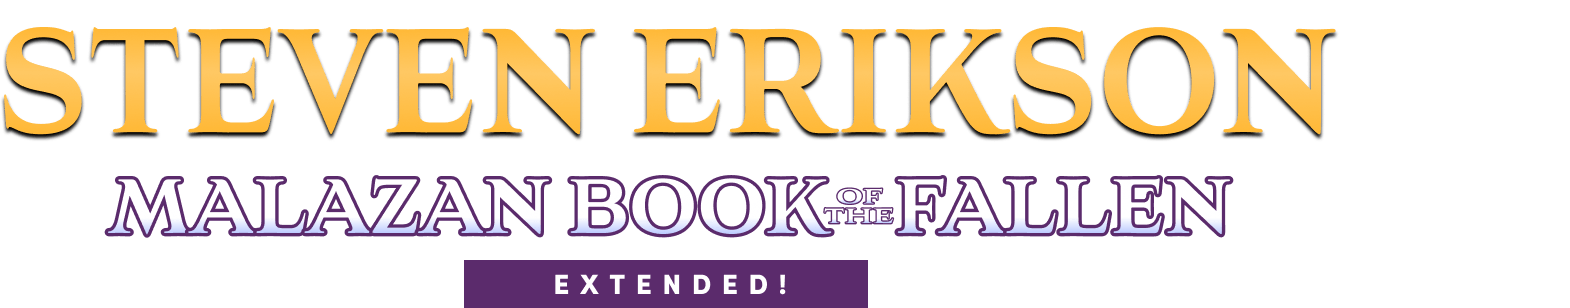 Humble Book Bundle: Steven Erikson's Malazan Book of the Fallen by TOR Publishing Group